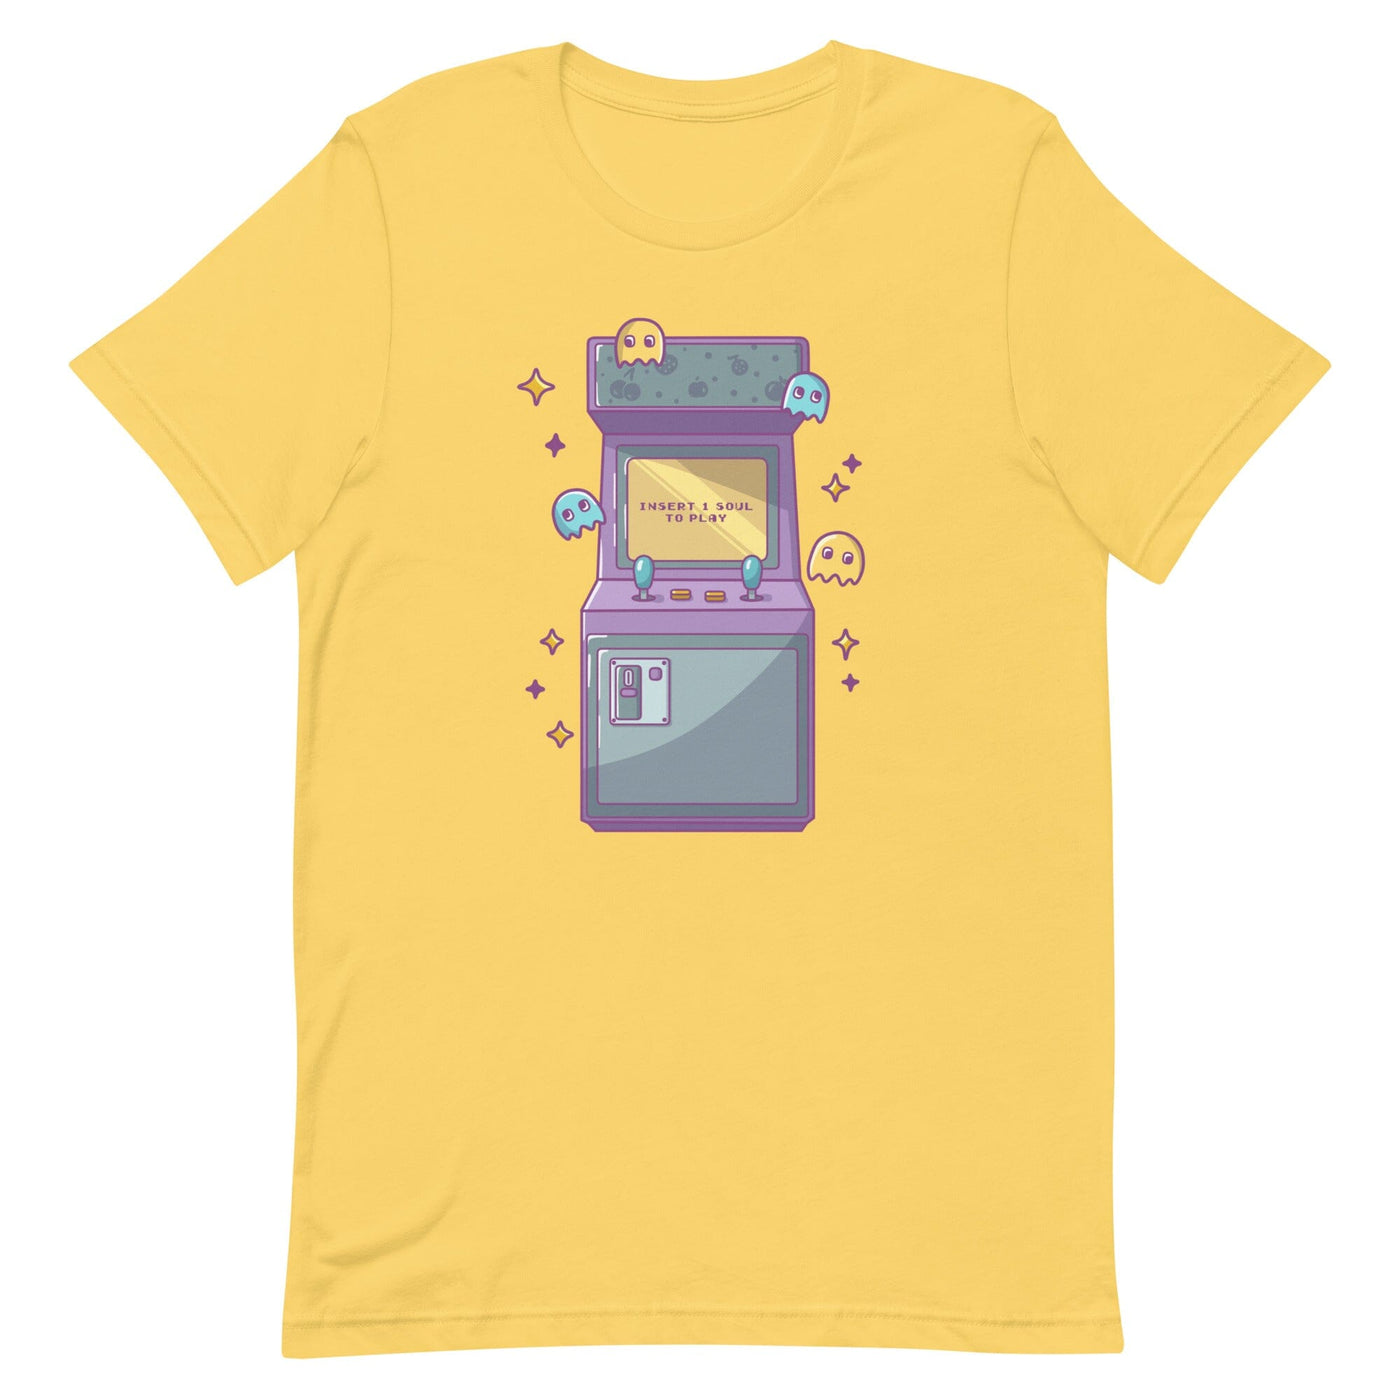 Insert 1 Soul to Play | Unisex t-shirt | Retro Gaming Threads & Thistles Inventory Yellow S 